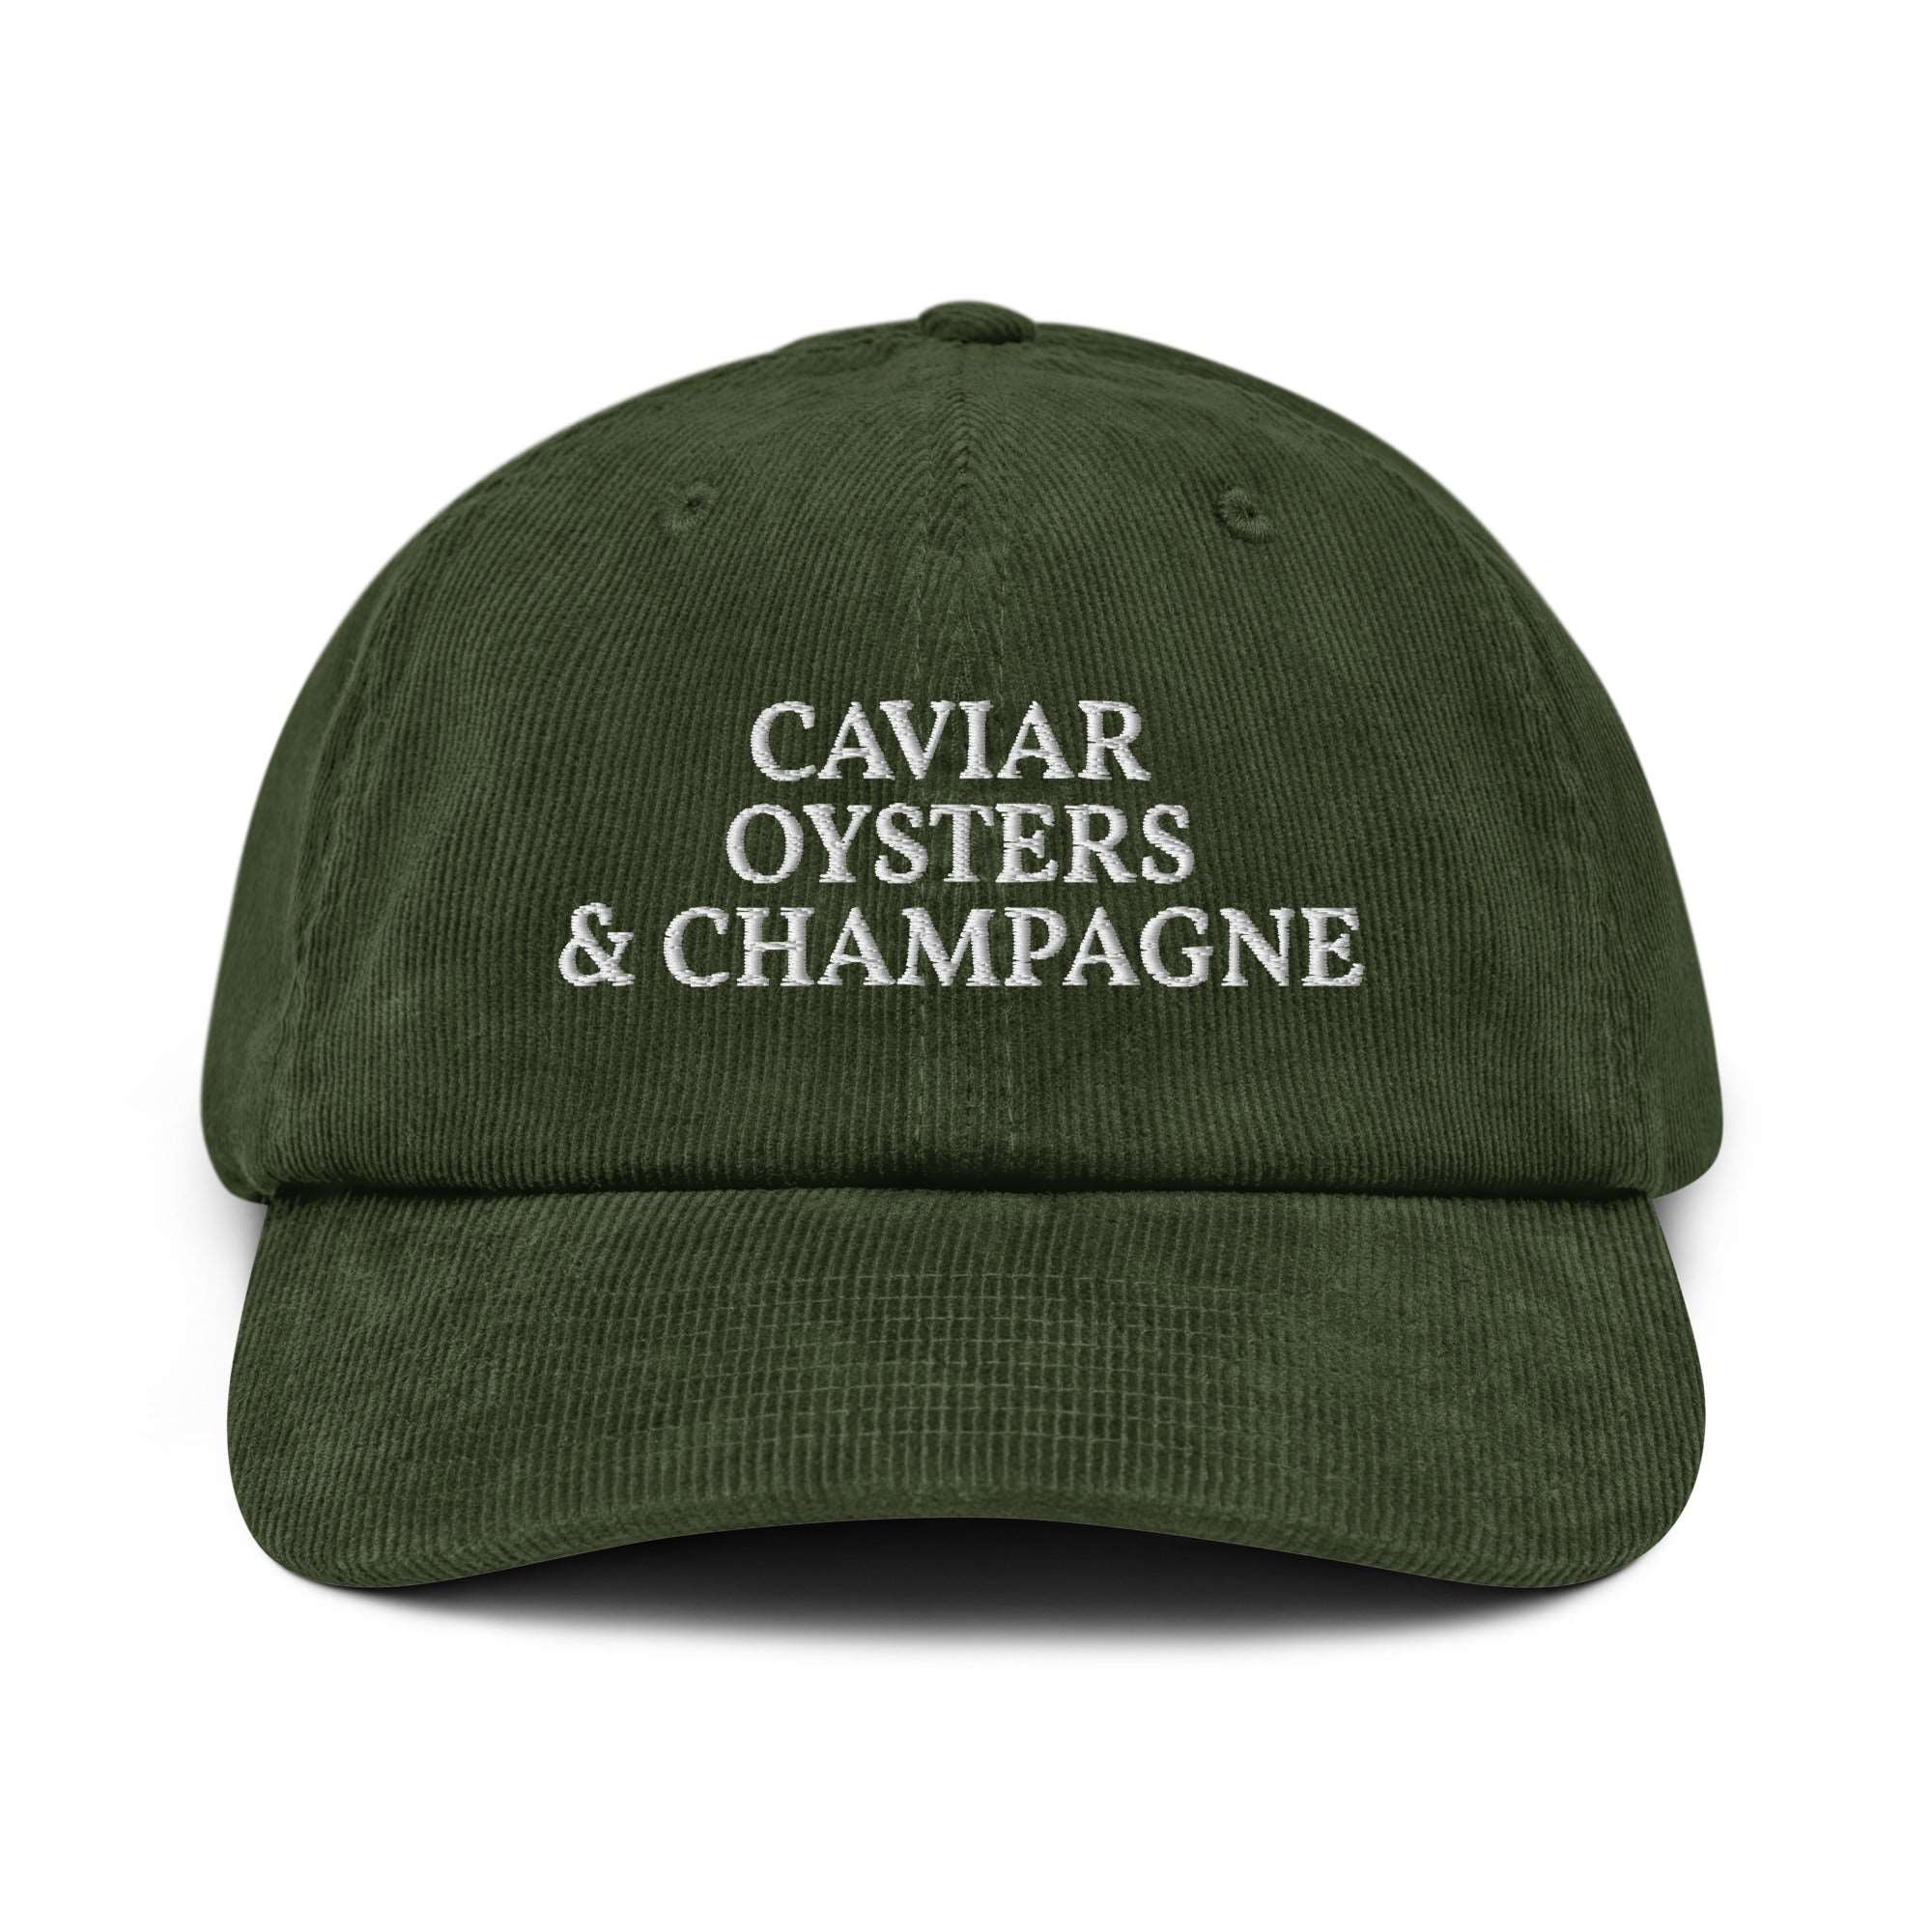 Caviar, oysters & Champagne - Corduroy Cap - The Refined Spirit